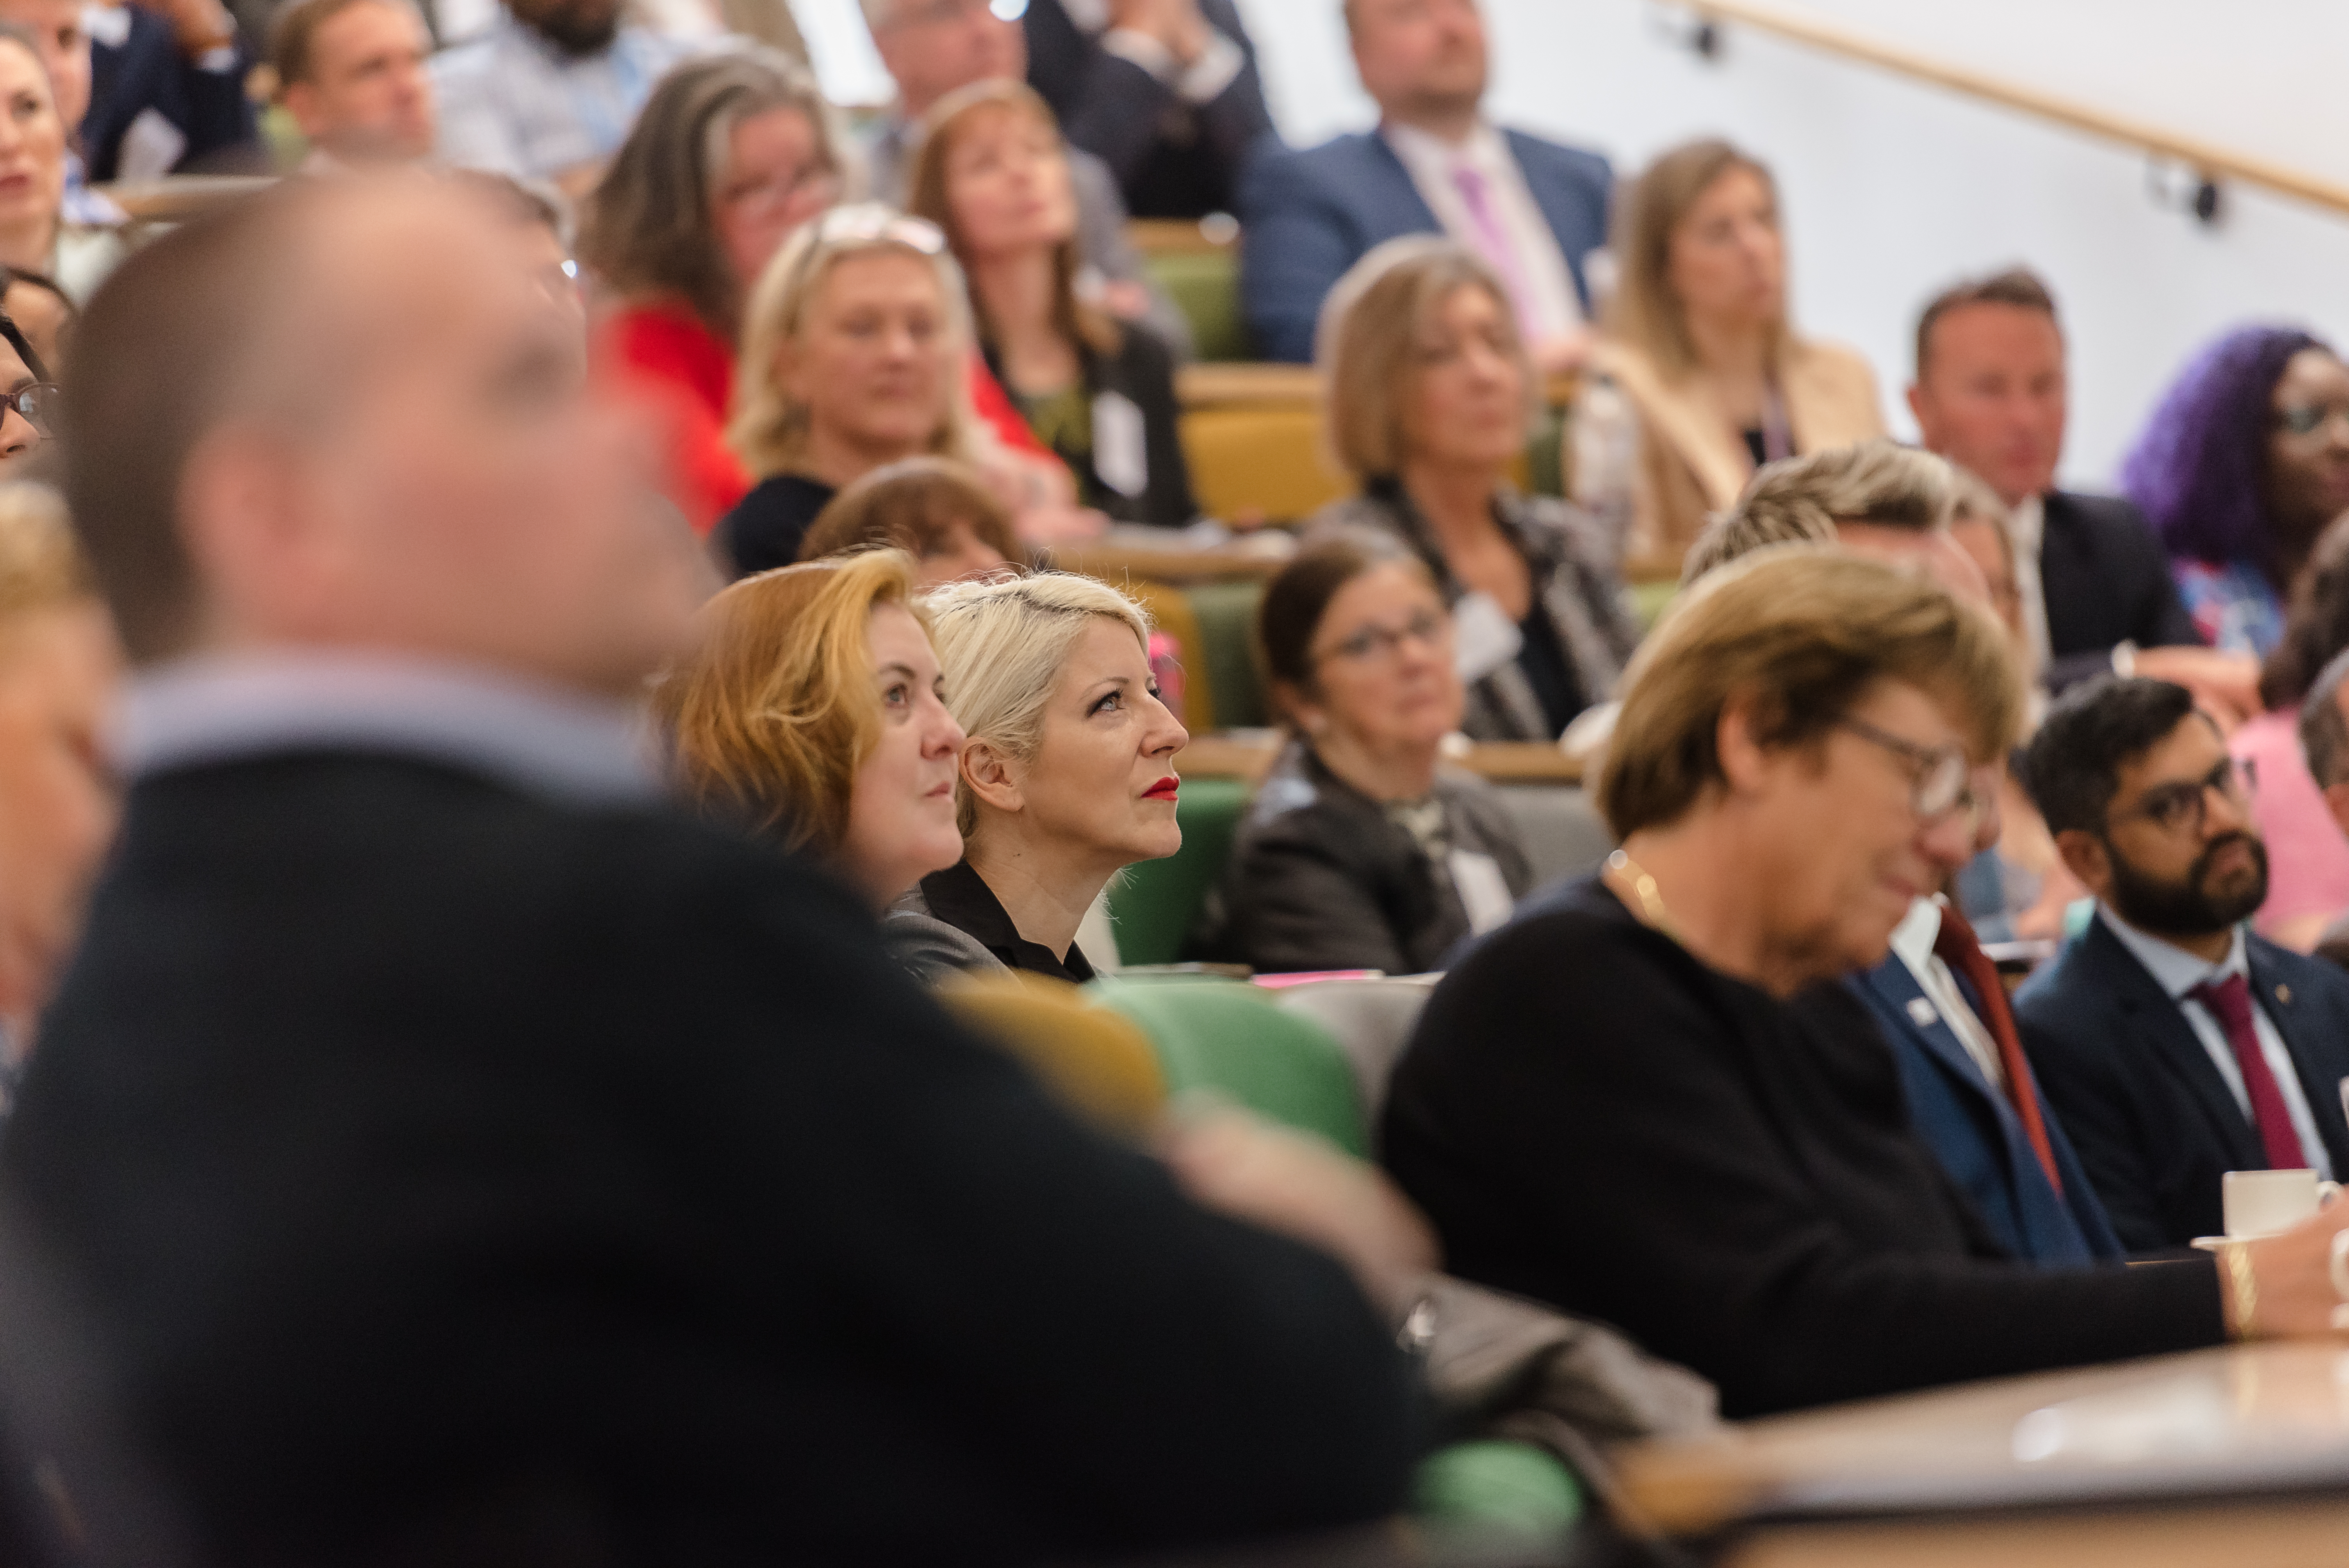 Delegates sat in a lecture theatre watching the Business Summit 